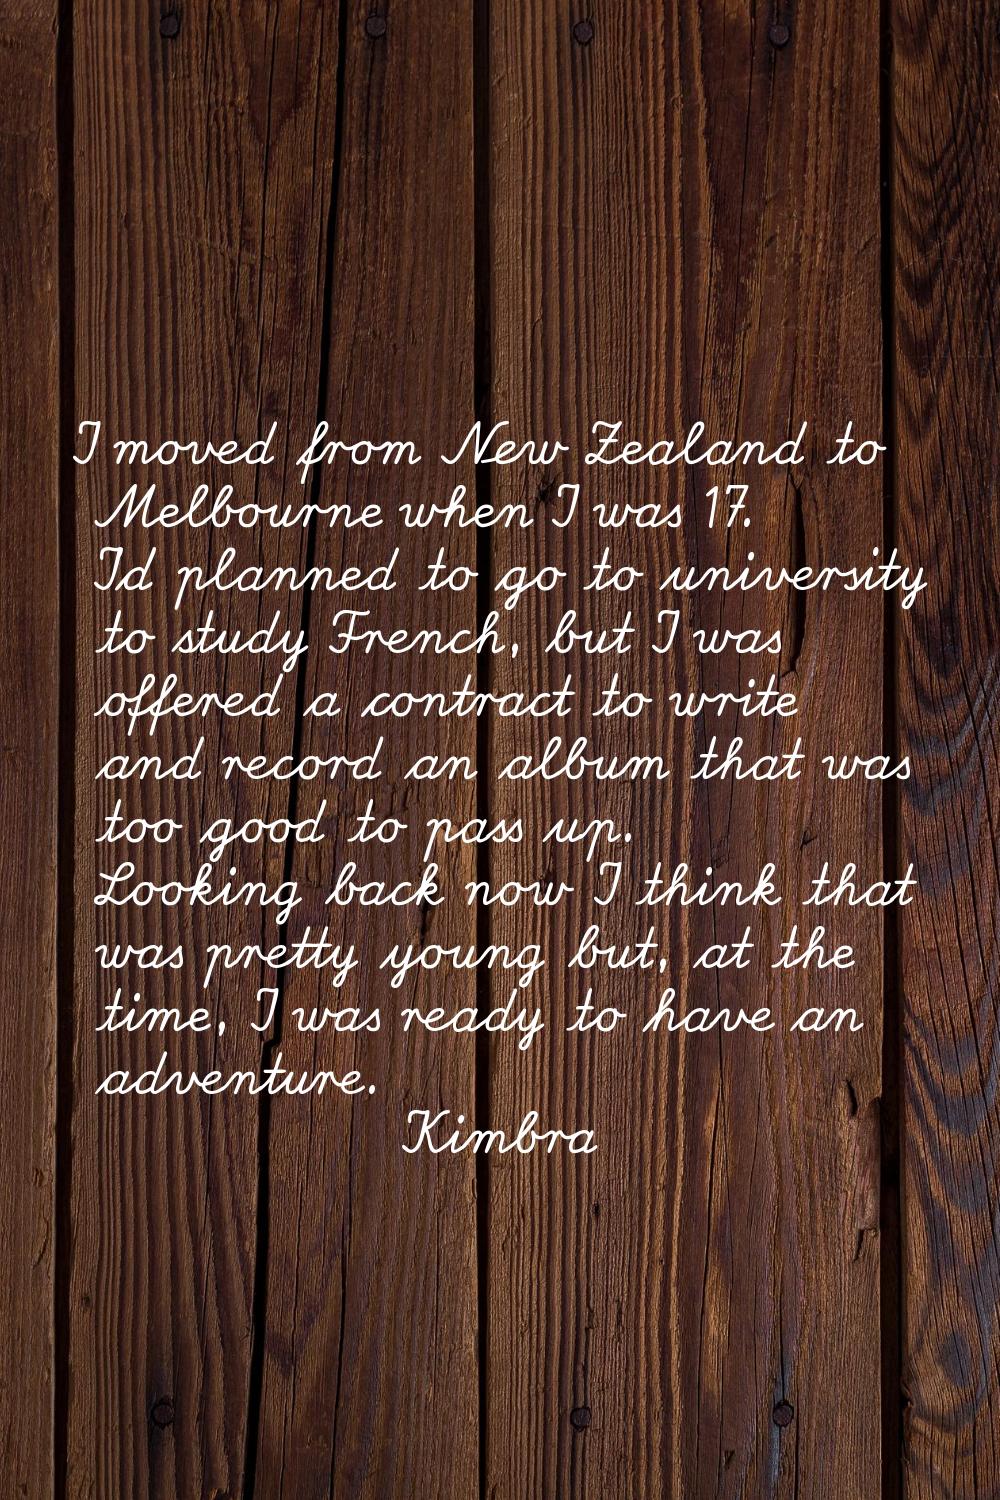 I moved from New Zealand to Melbourne when I was 17. I'd planned to go to university to study Frenc